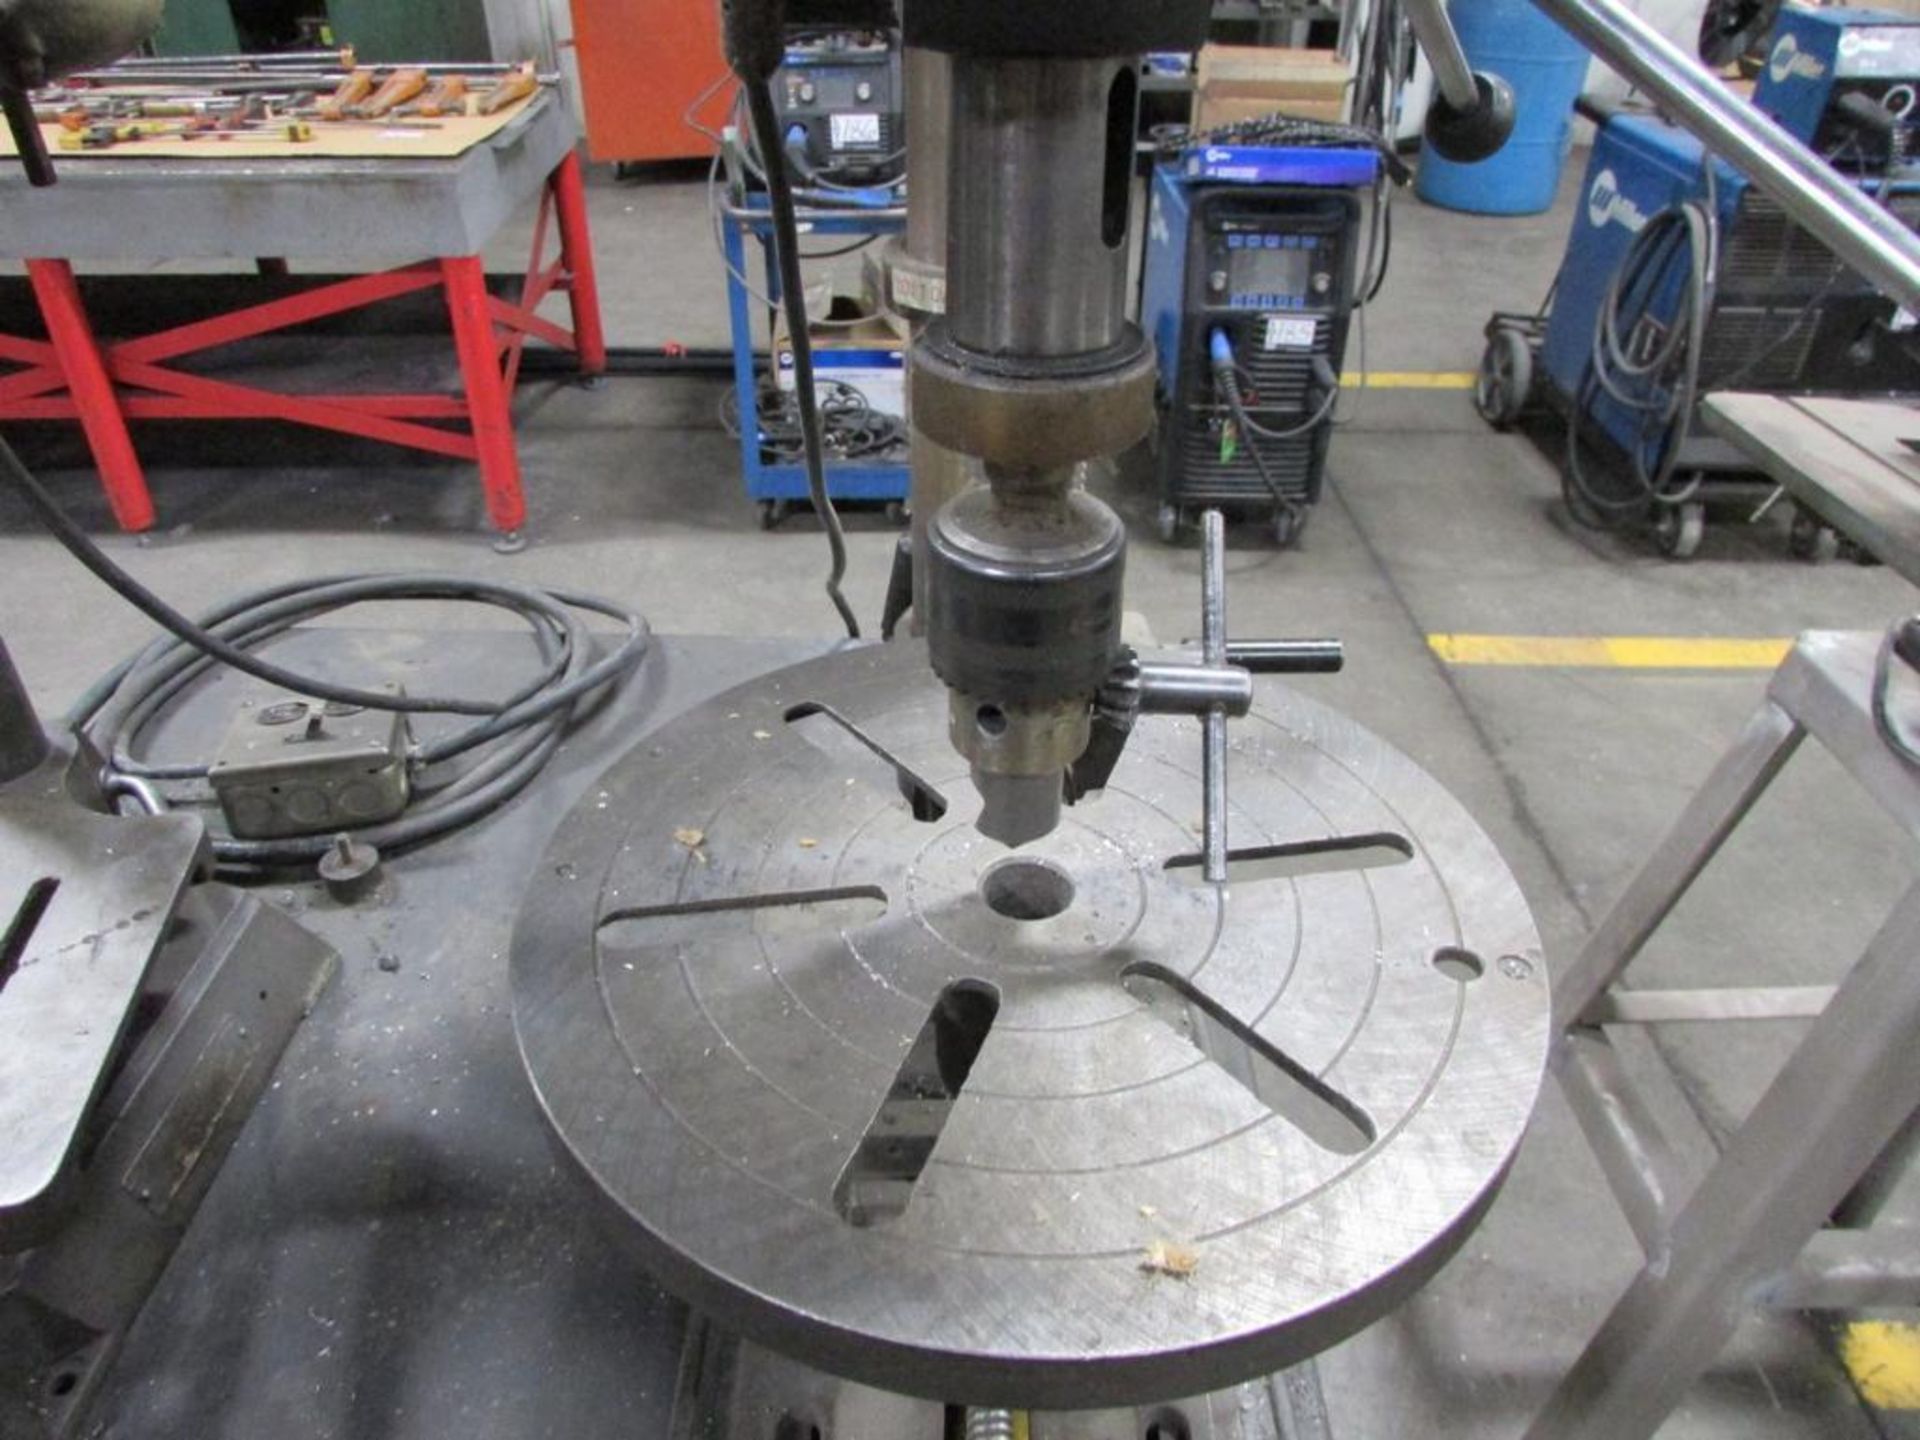 Speedway Series 3514 12" Benchtop Drill Press, 11.5" Diameter Table, 4" Vise, 5/8" Chuck, 2-1/4" Str - Image 4 of 7